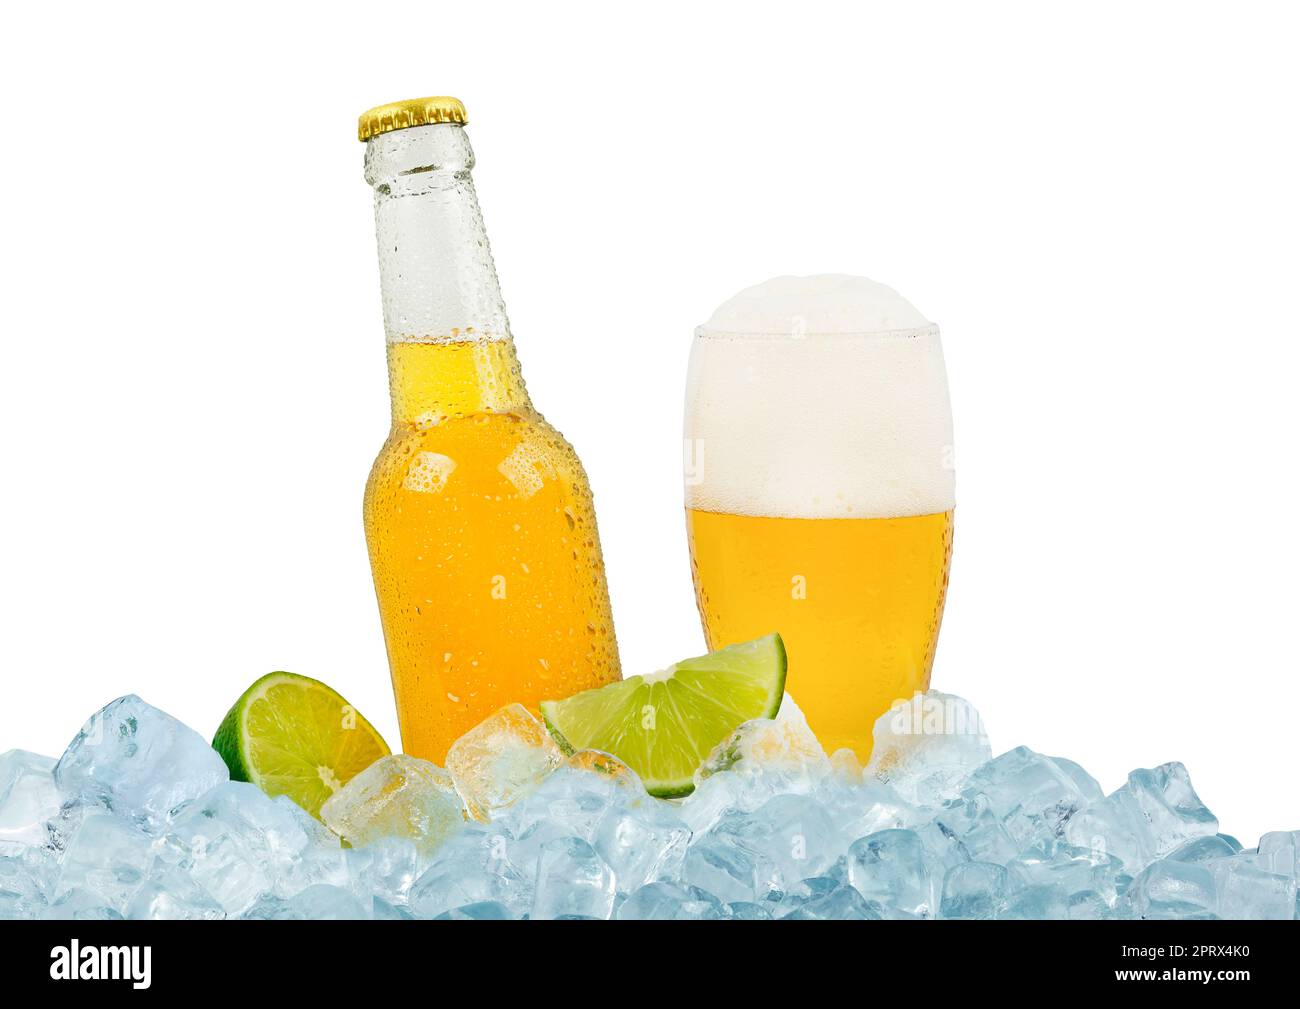 Bottle and glass of lager beer on ice Stock Photo